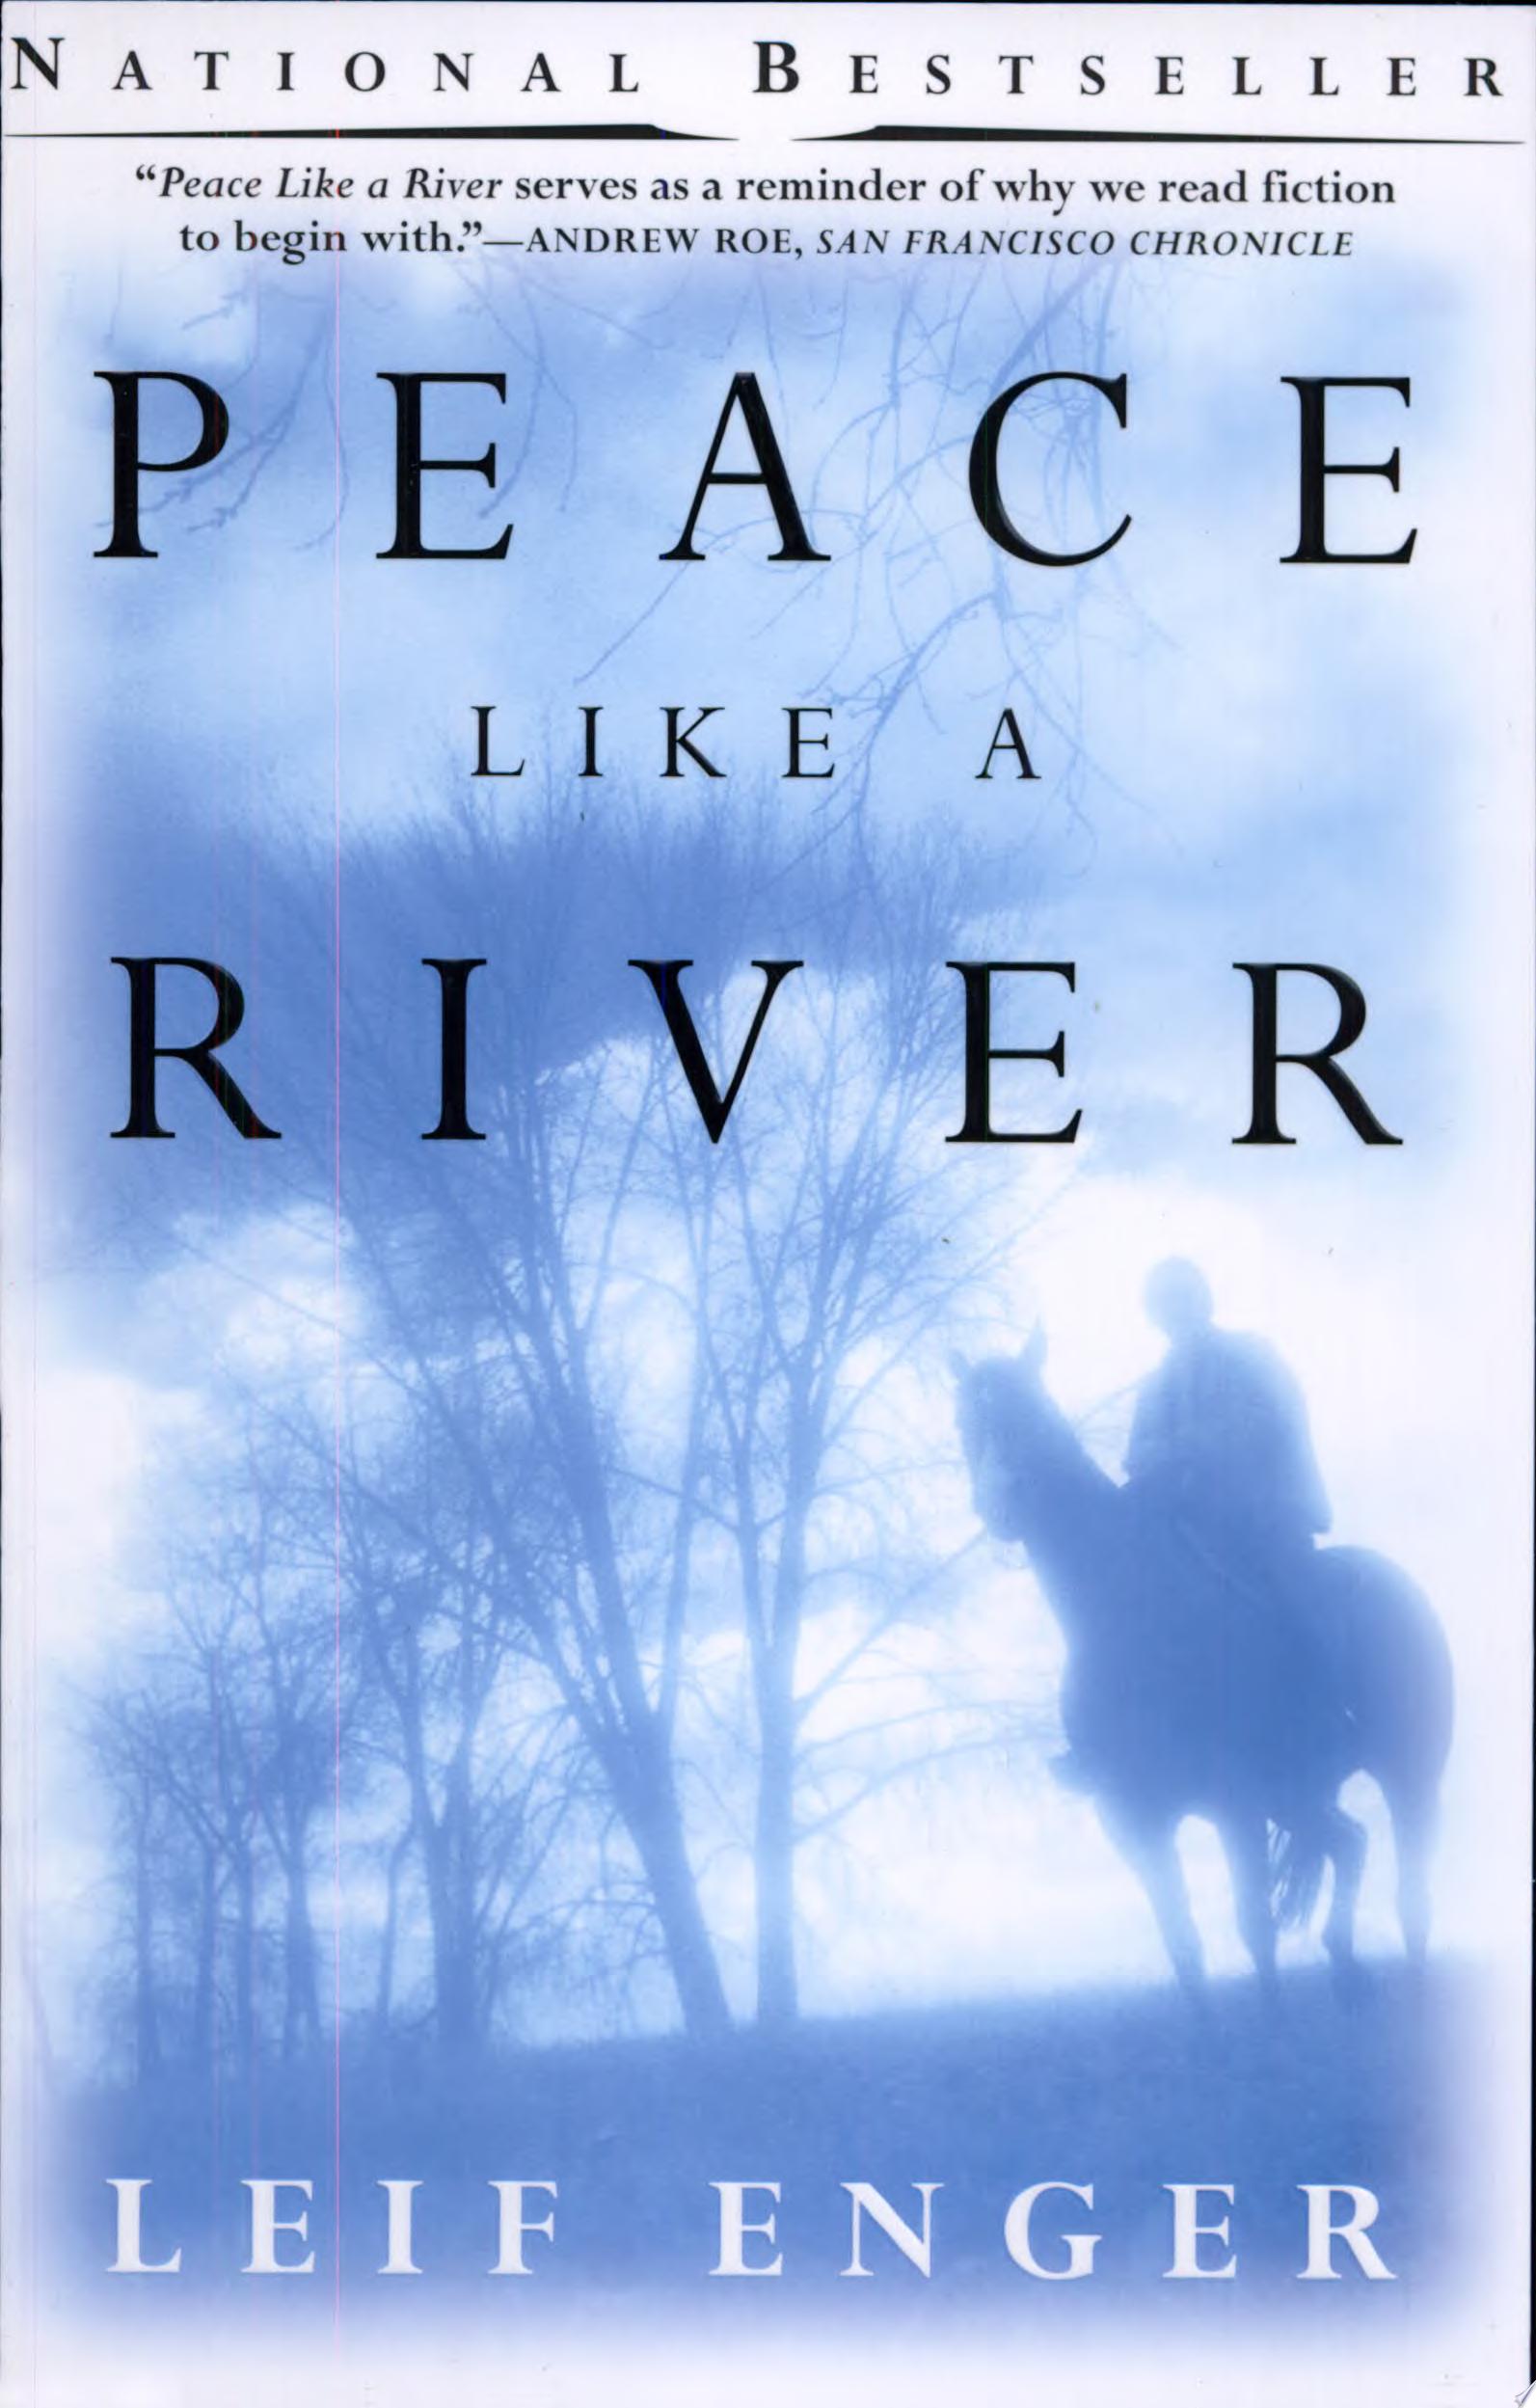 Image for "Peace Like a River"